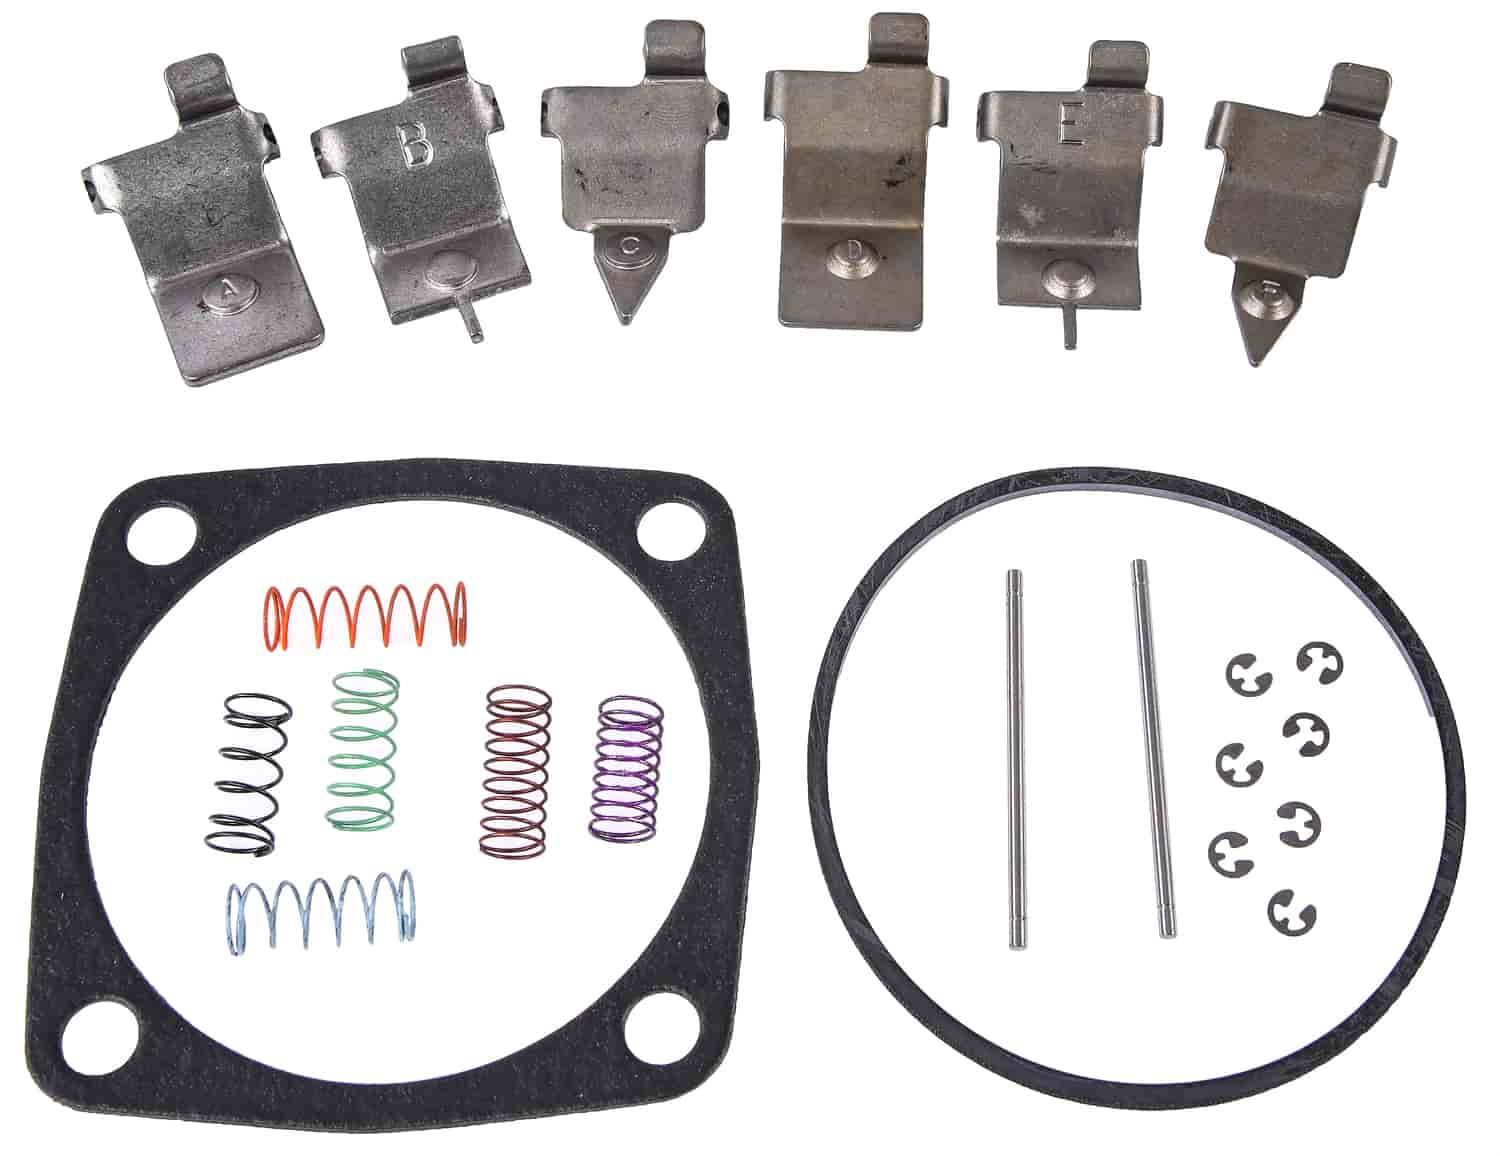 Governor Recalibration Kit for GM TH-250, TH-350, TH-400,